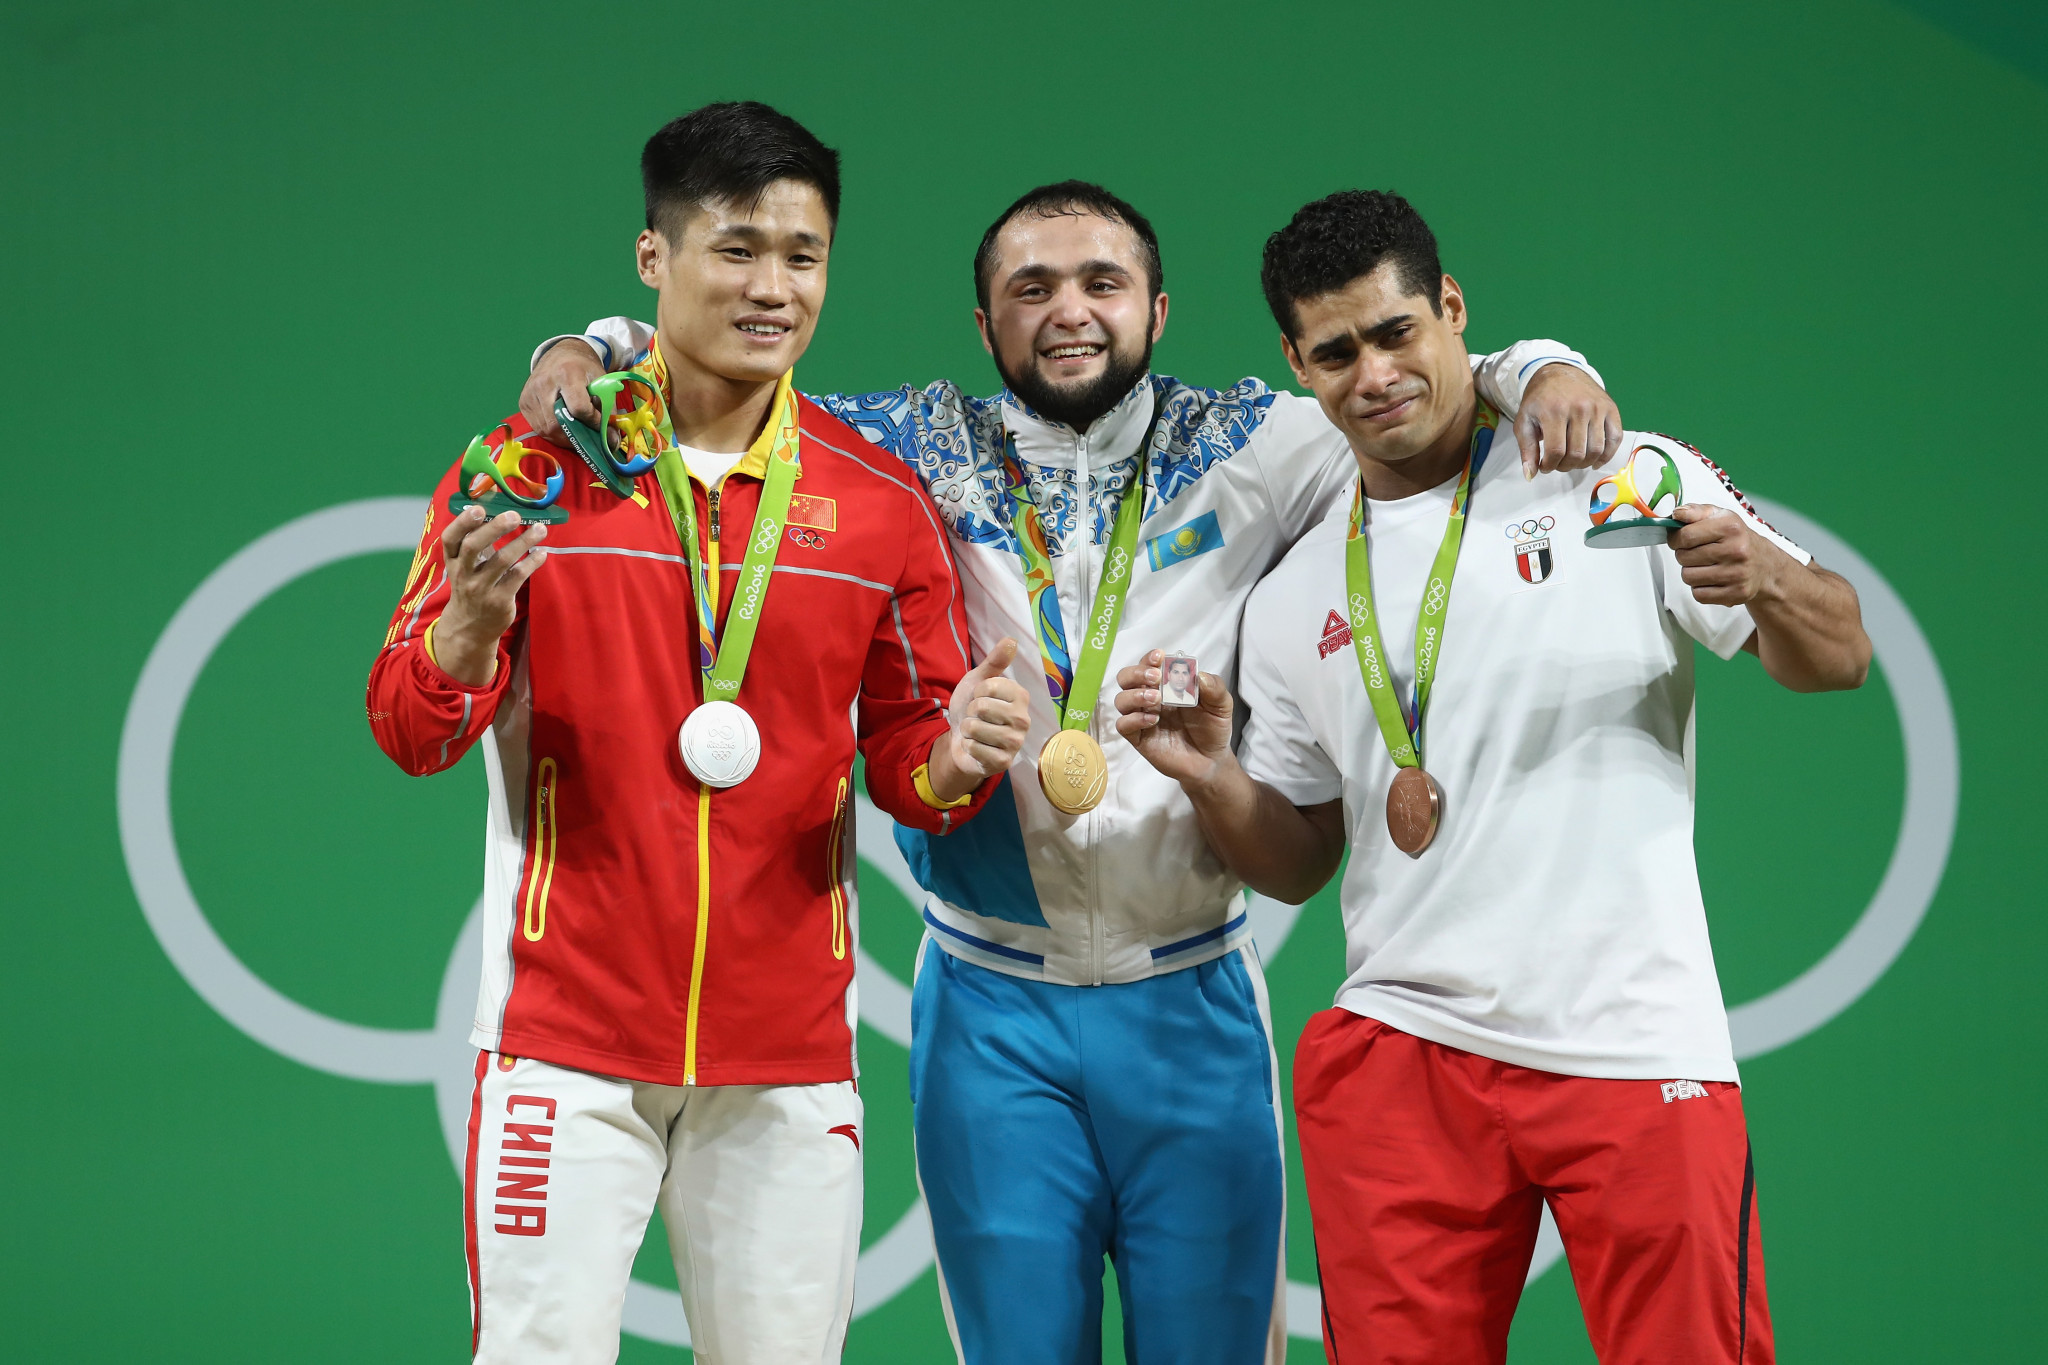 Nijat Rahimov, centre, along with Lu Xiaojun, left, and Mohamed Ehab, right, during the men's 77kg medal ceremony at Rio 2016 ©Getty Images